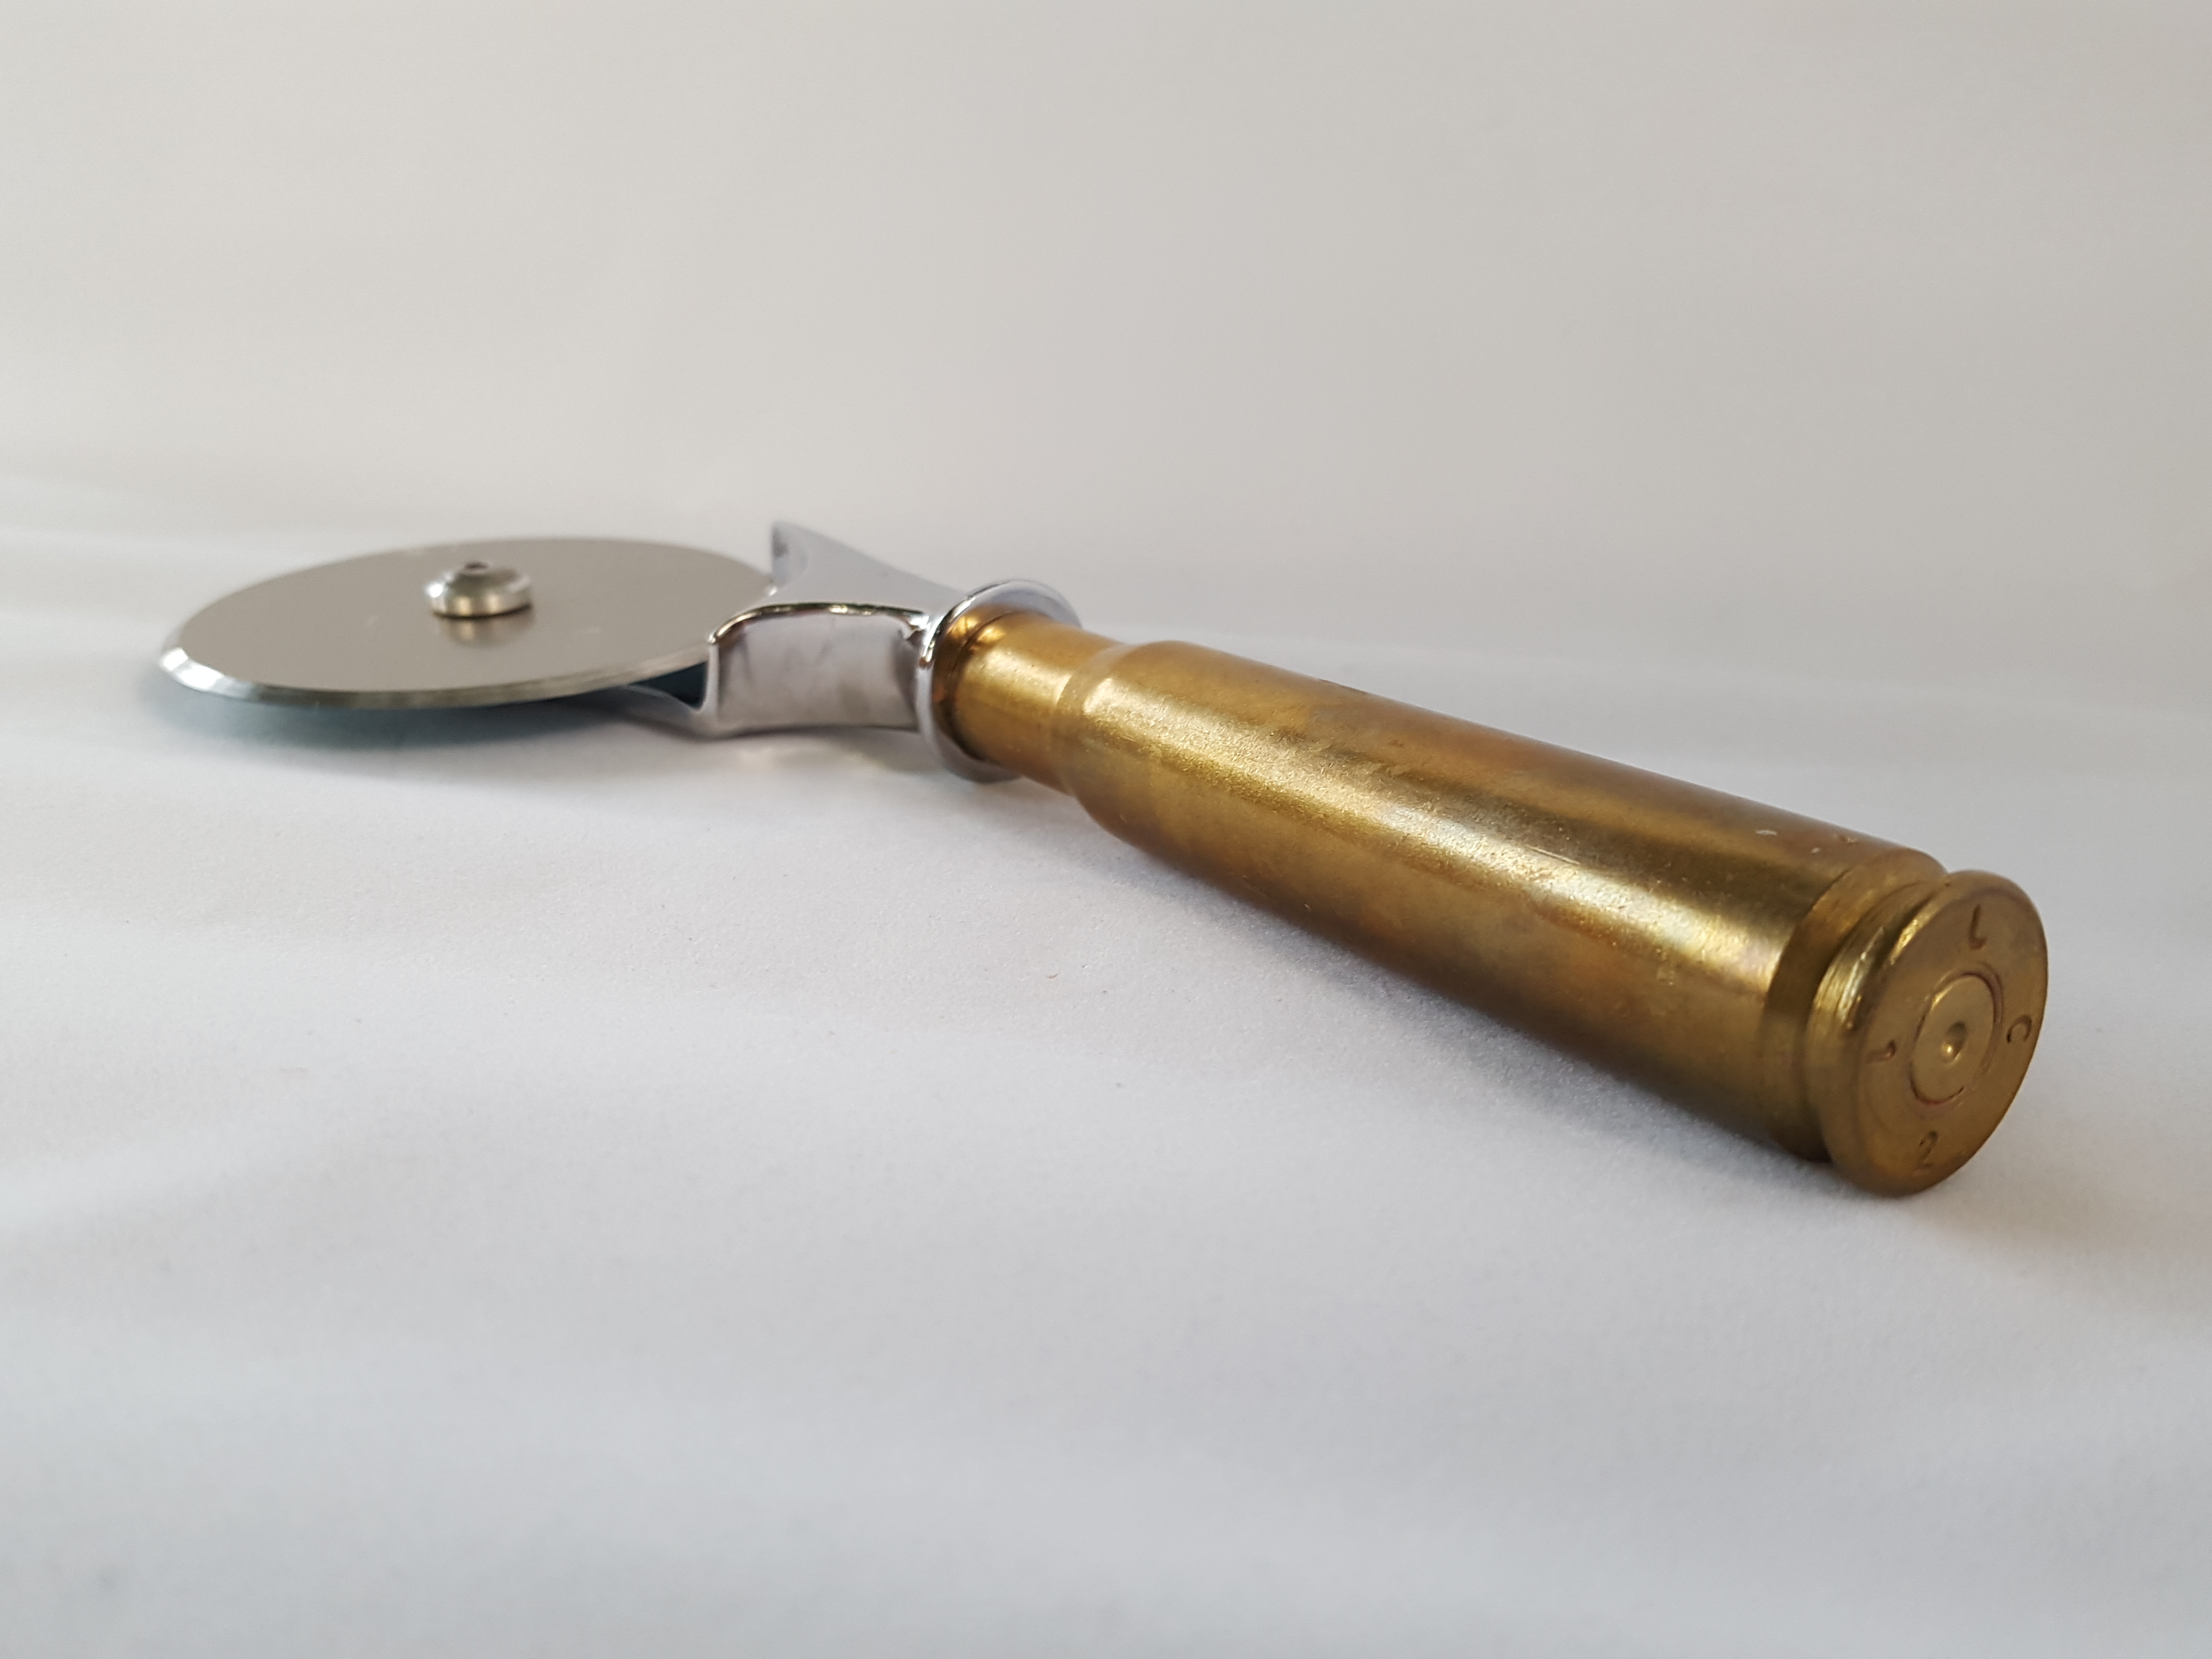 50 Caliber Pizza Cutter Sawdust and Bullets